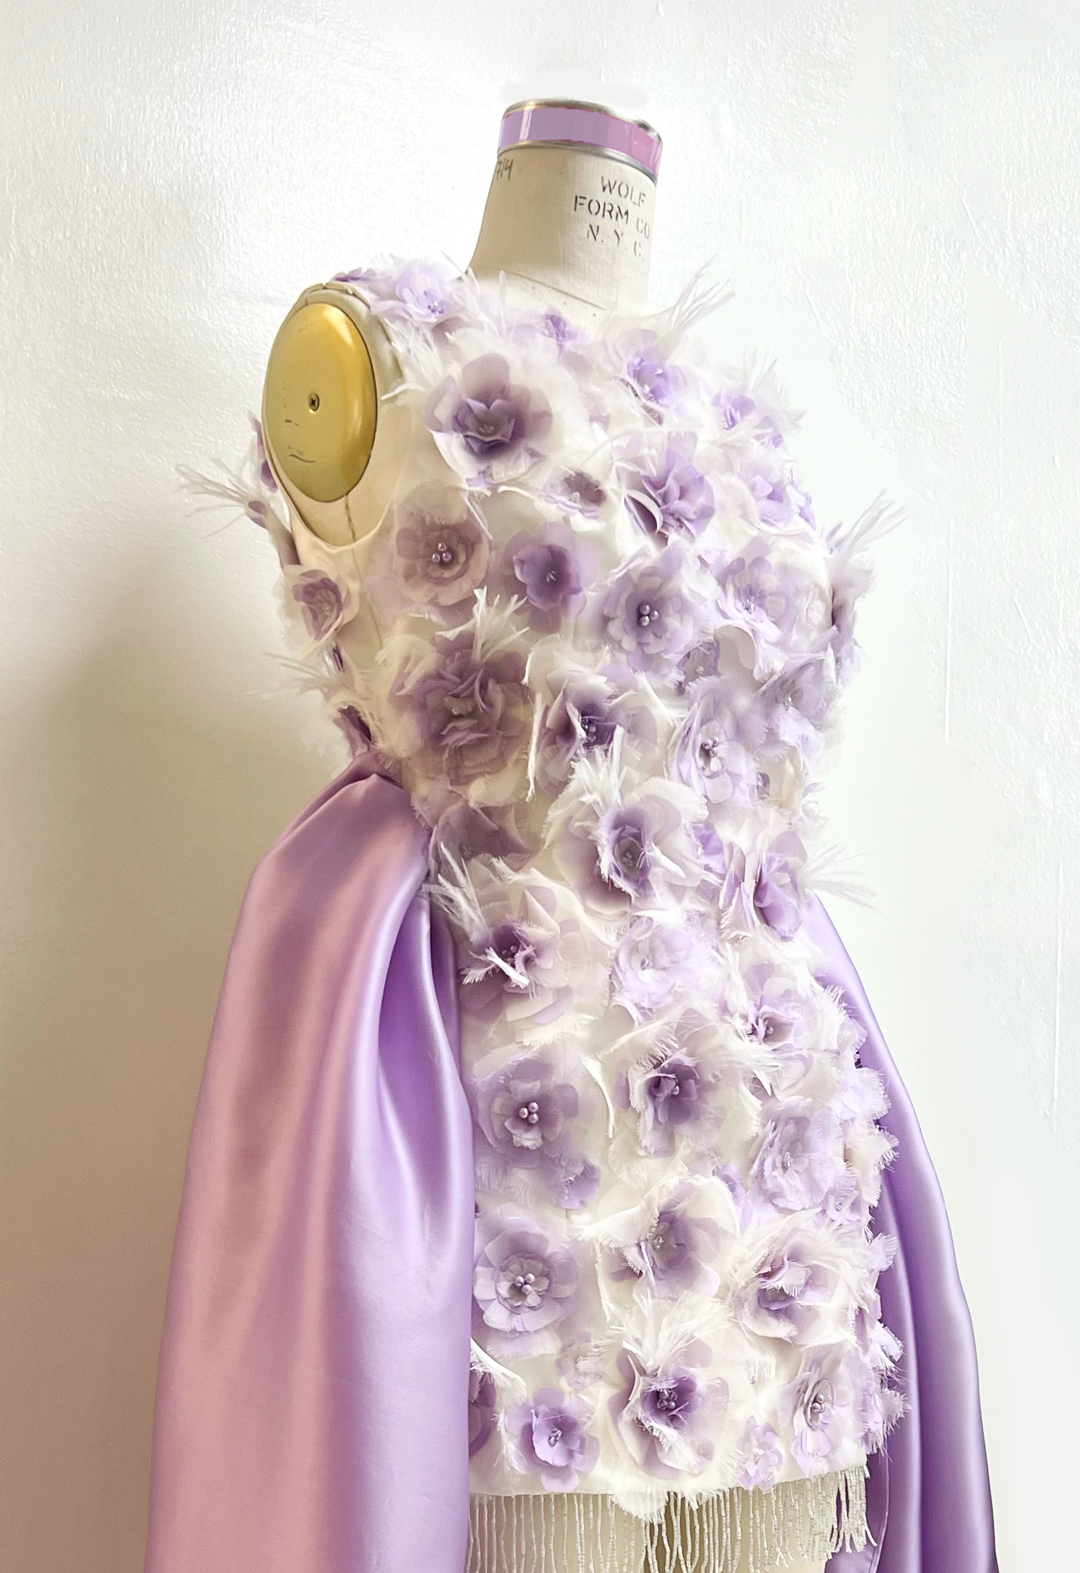 This dress is made of silk satin, organza, and chiffon. Detailed photo of a white satin mini dress with lilac embellished chiffon and organza flowers on a dress form. Flowers made of chiffon and organza that are different shades of lilac. Iridescent beads and swarovski crystals can be seen on the center of each flower.